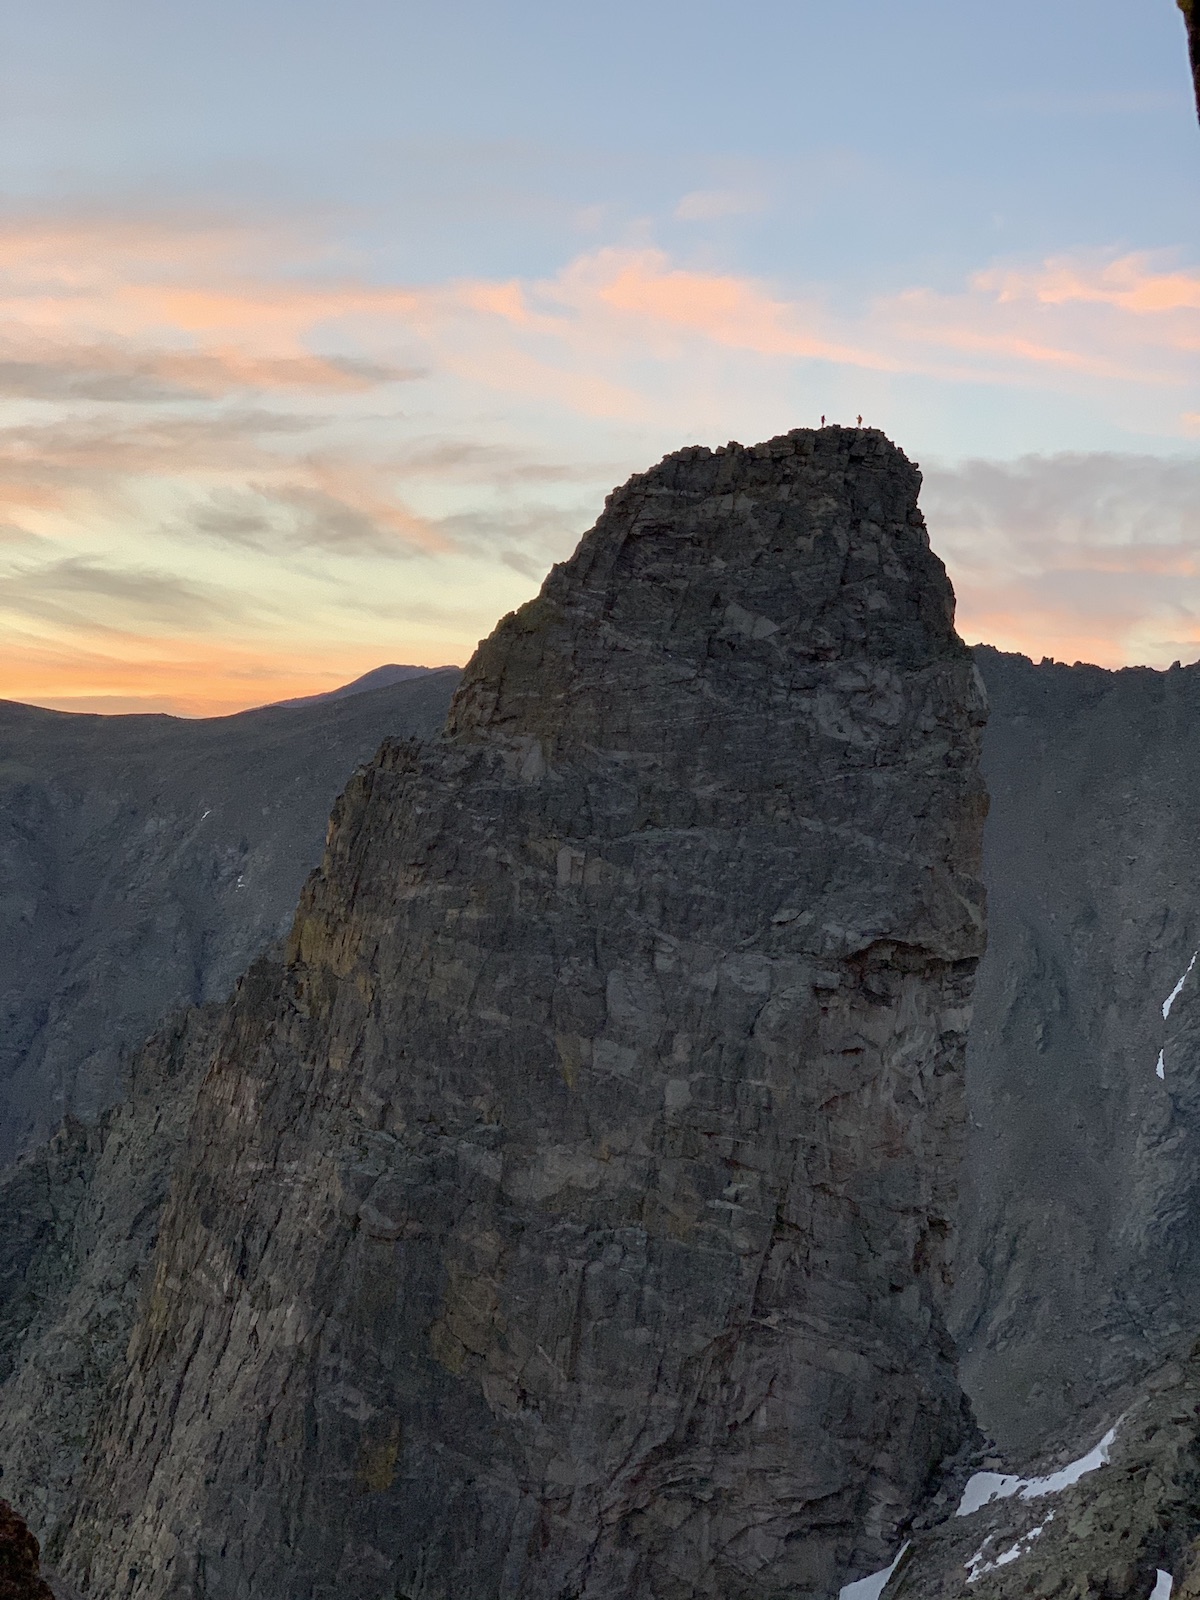 Alex Honnold and Tommy Caldwell can be seen standing on the summit of the Sharkstooth (12,630') in Rocky Mountain National Park at sunrise on Saturday, July 18, during their Continental Divide Ultimate Linkup (CDUL). [Photo] Adam Stack